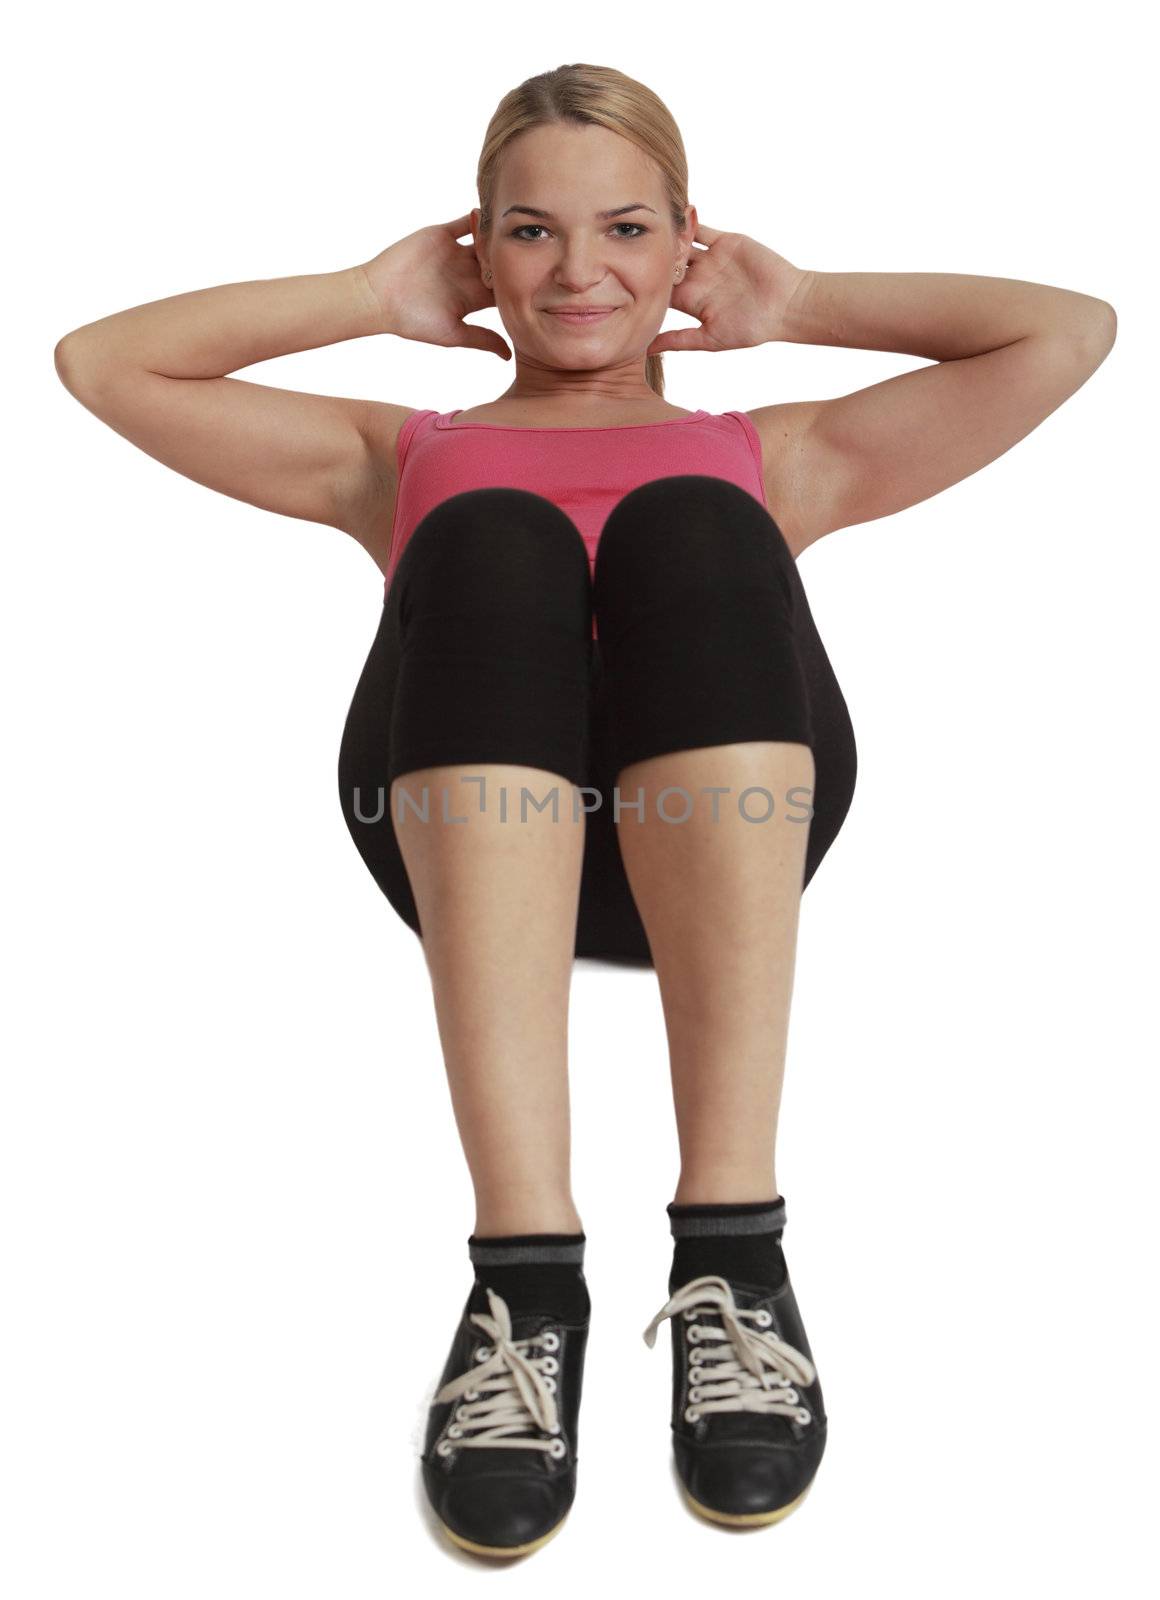 Upper view of a female doing sit-ups isolated against a white background.